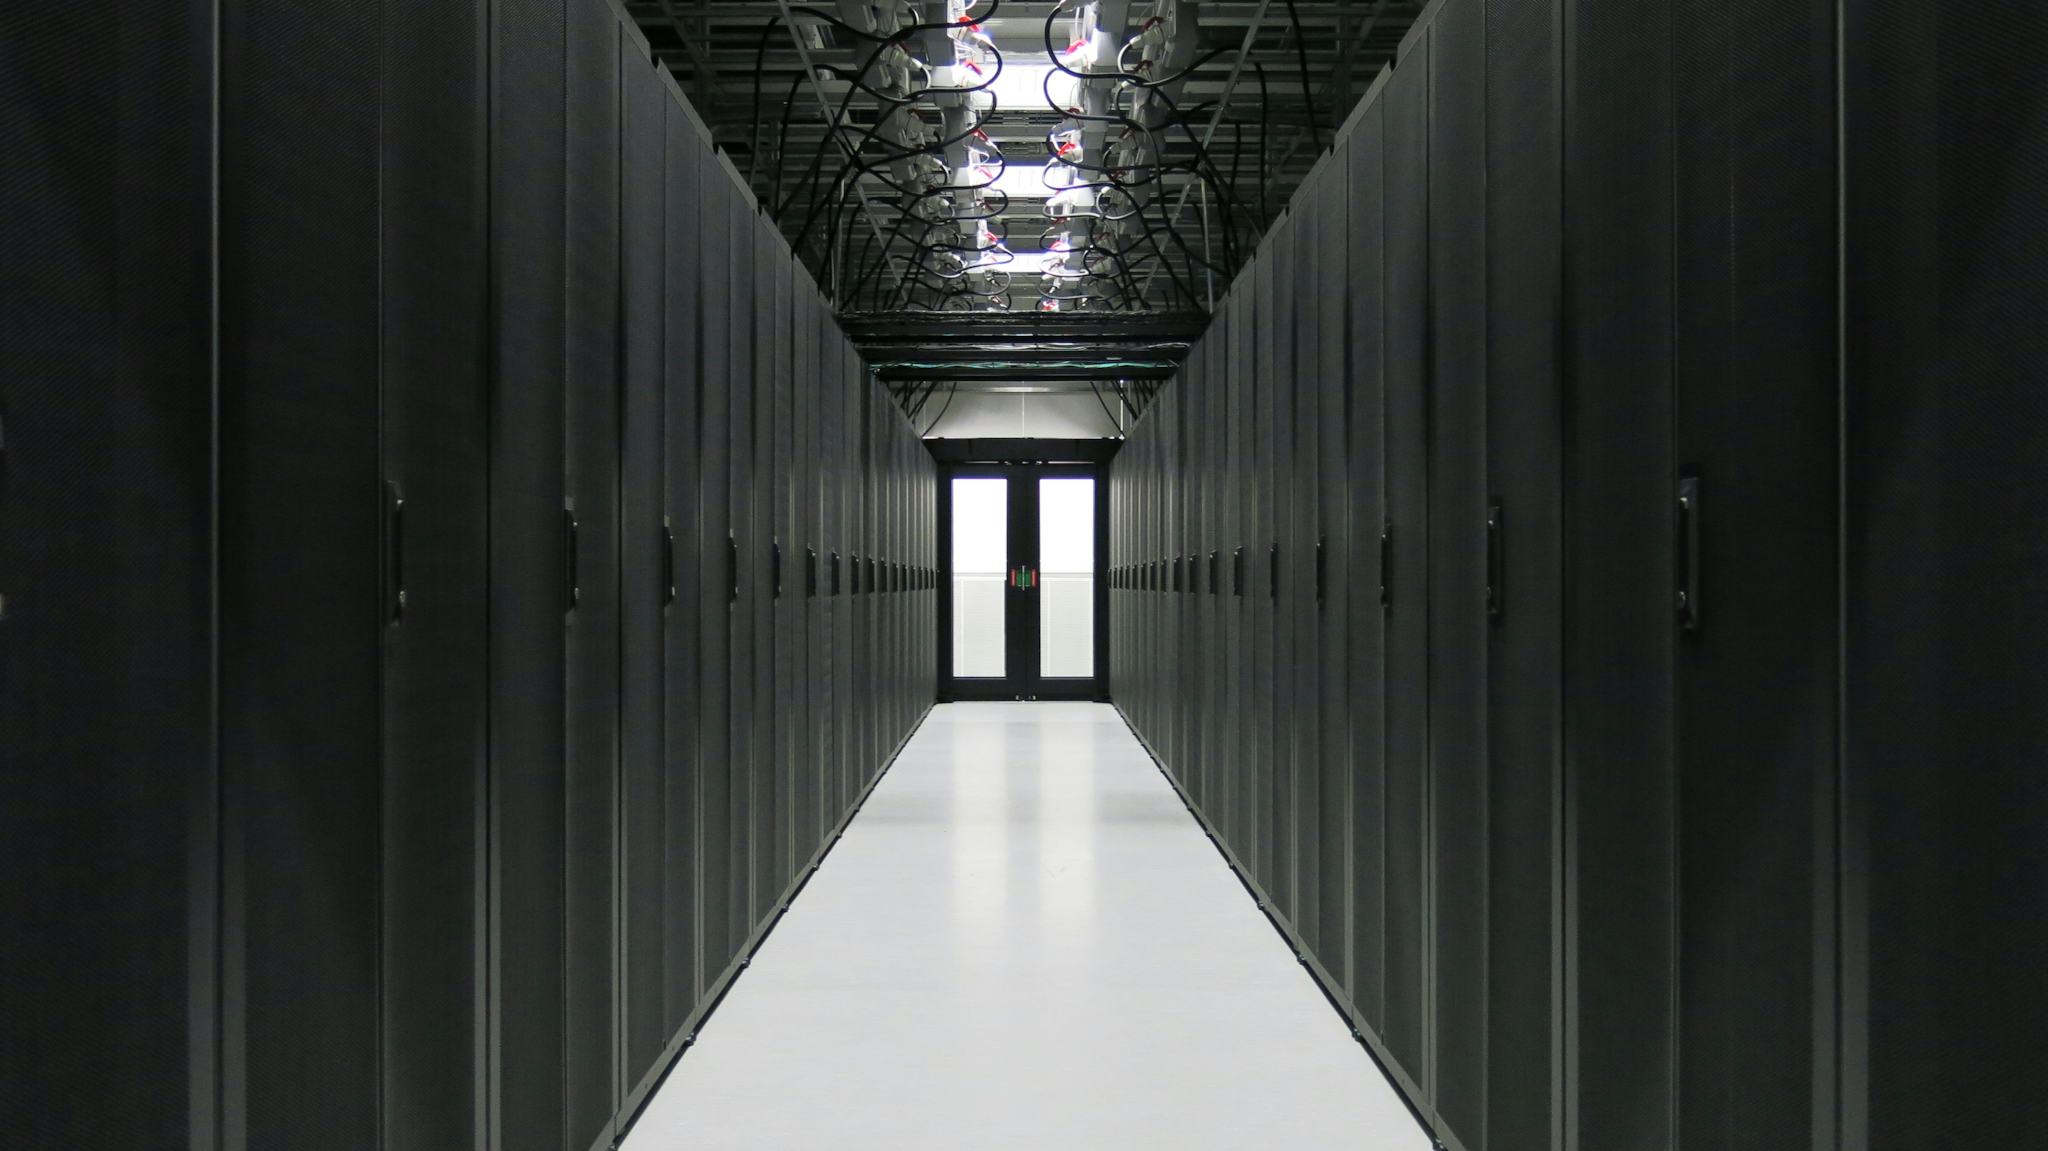 A long corridor with black cupboards on both sides, a front door at the end of the corridor. Cables from the black cabinets connected to a wire structure in the ceiling